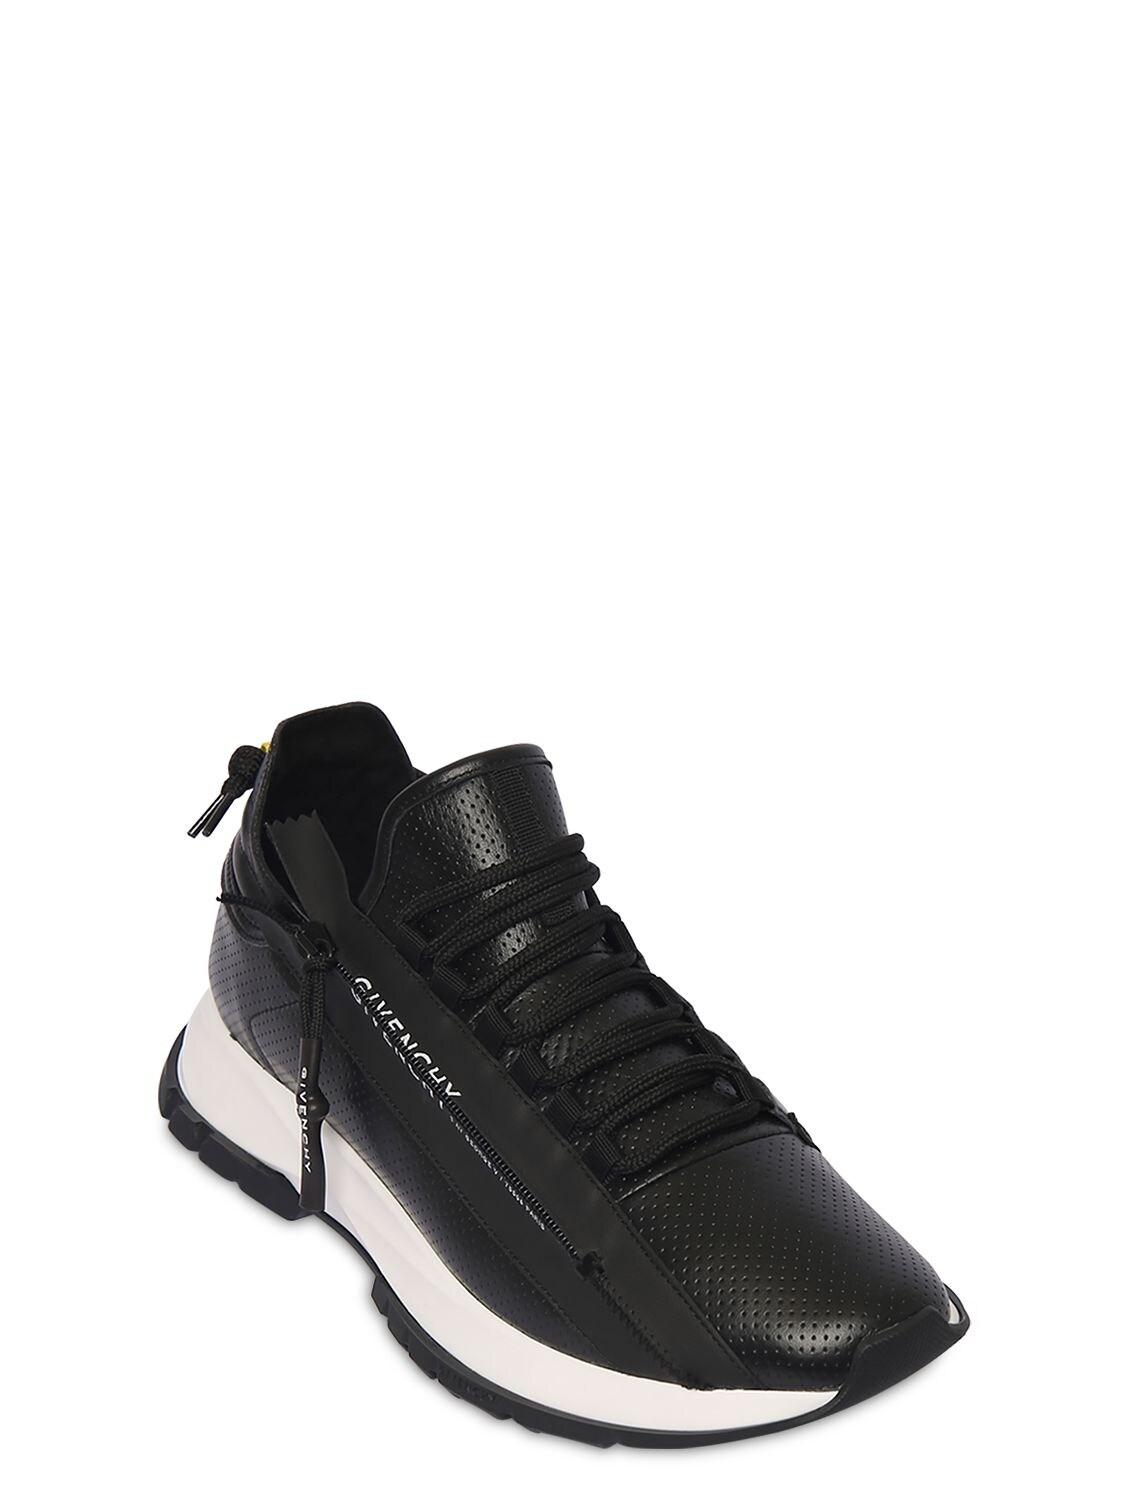 Givenchy Spectre Runner Leather Zip Sneakers in Black for Men - Lyst